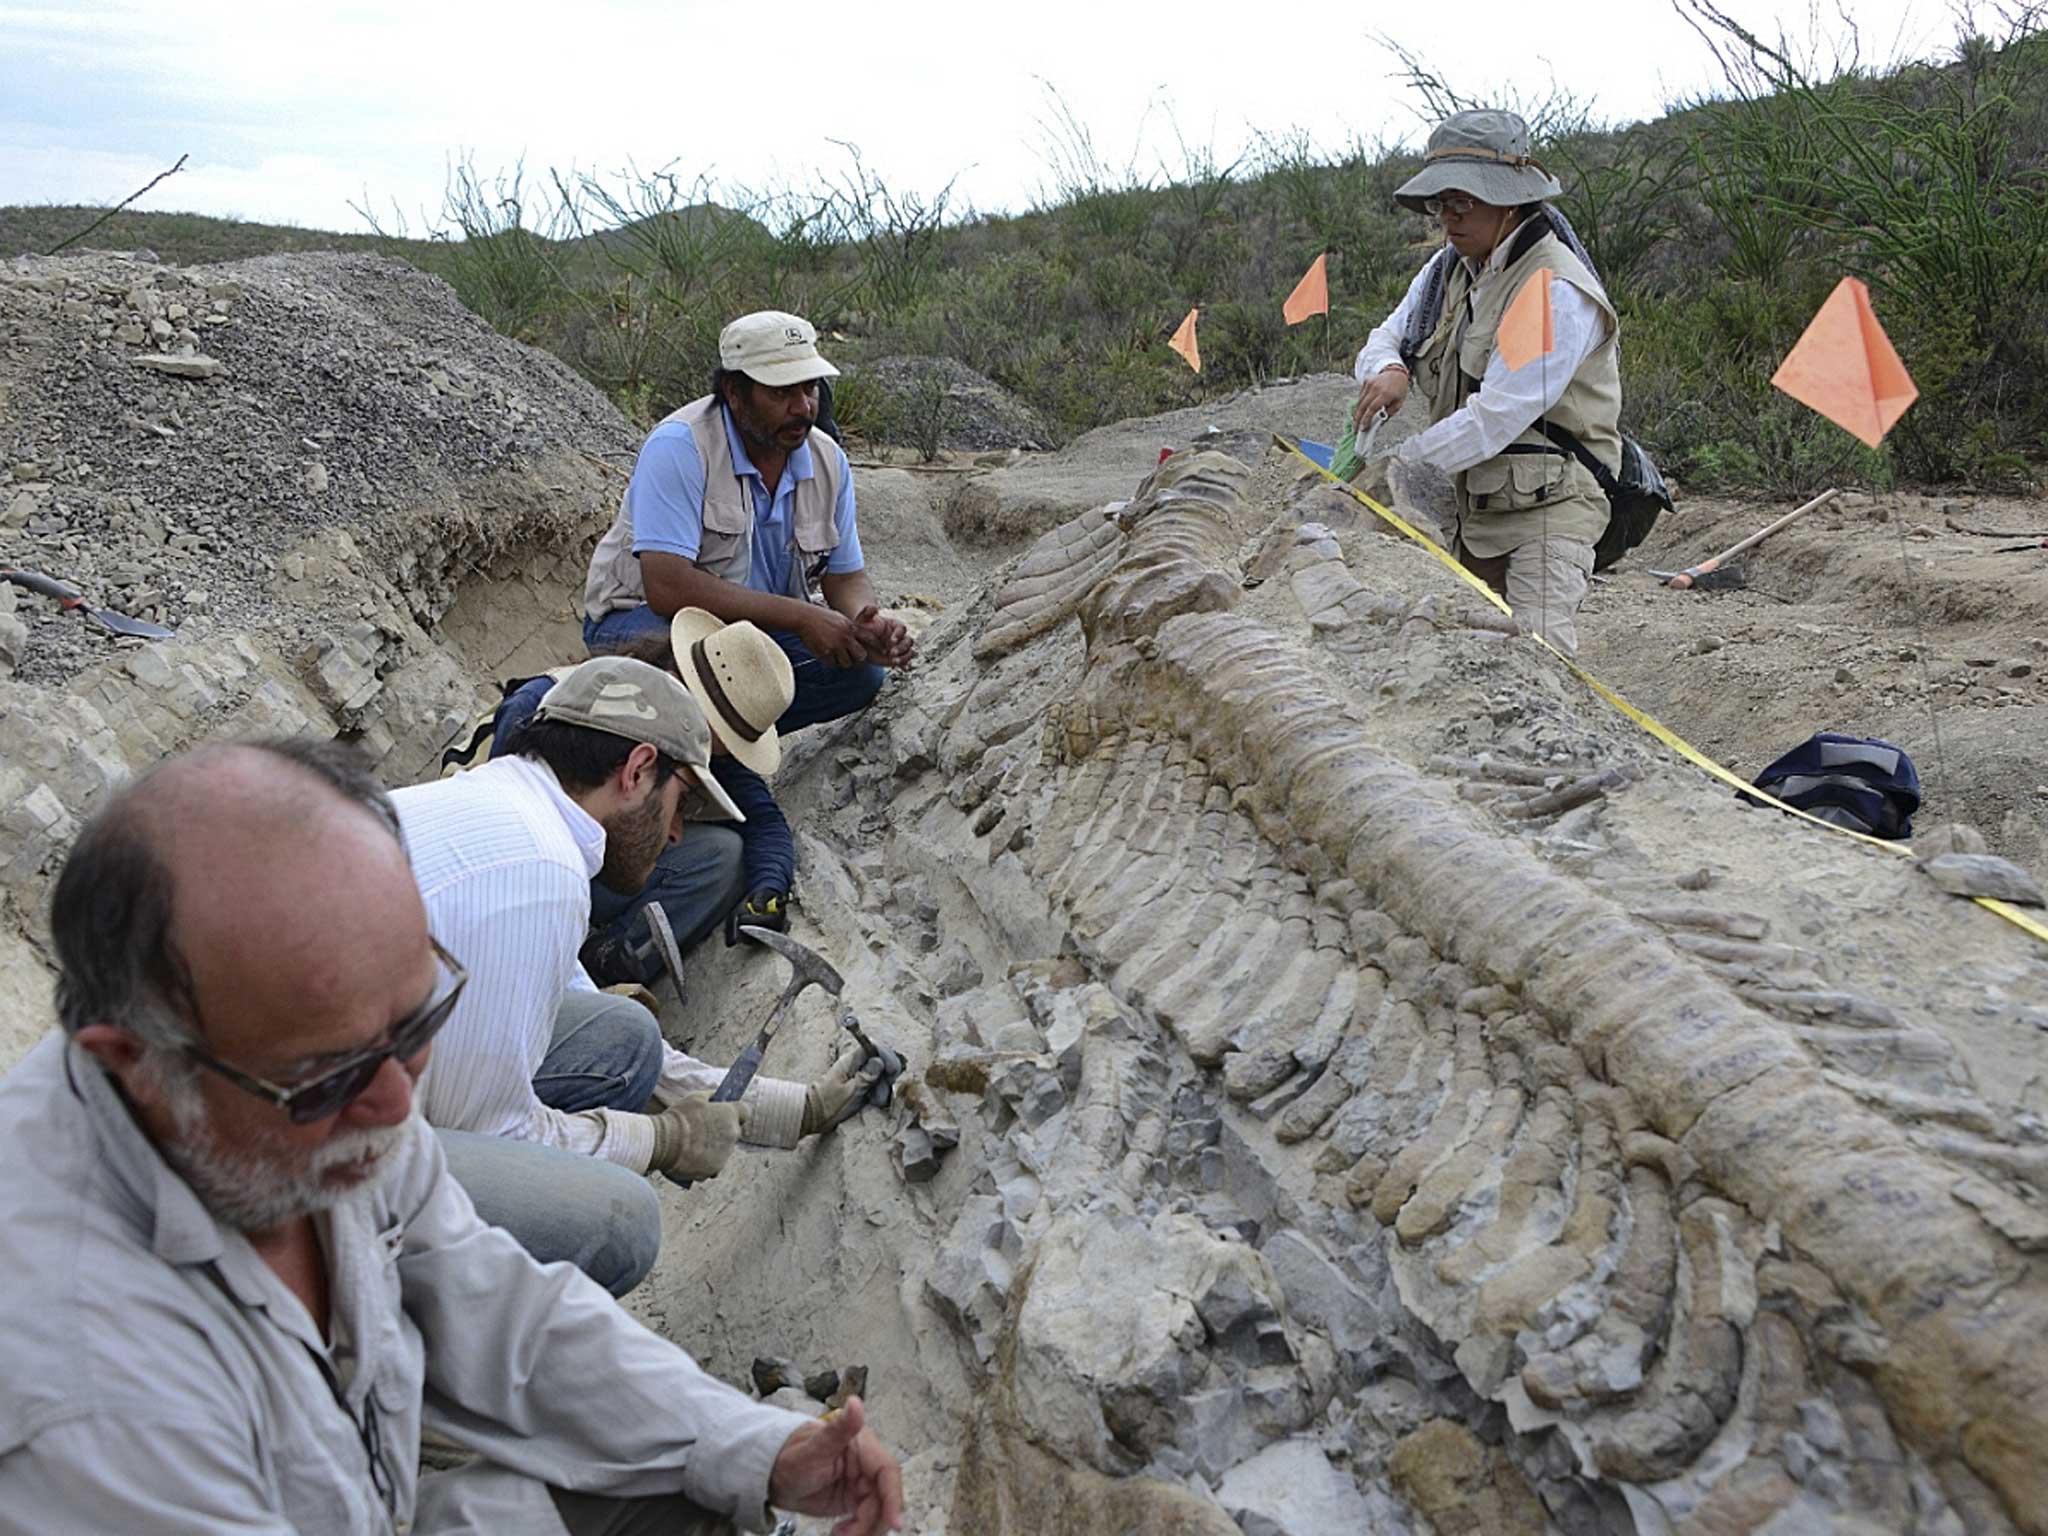 Archaeologists found the 50 vertebrae of the tail completely intact